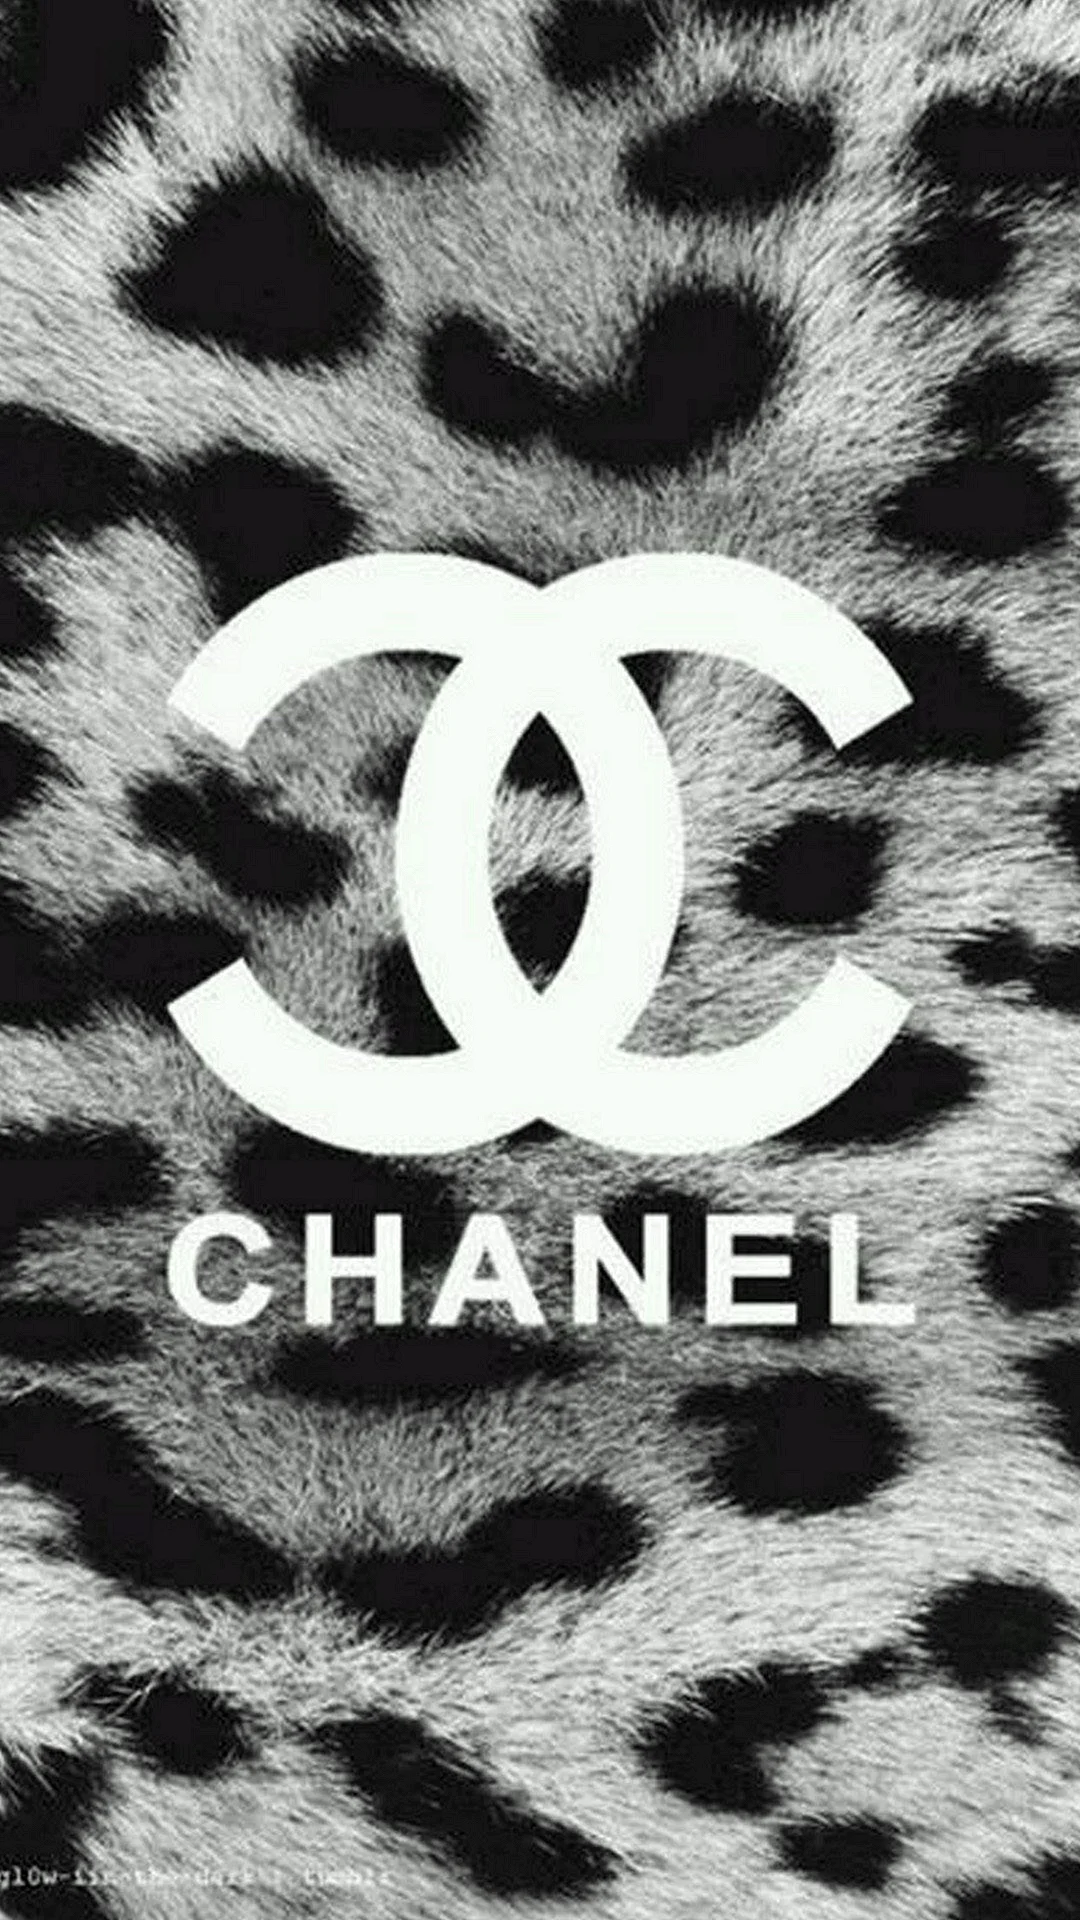 Coco Chanel Wallpaper For iPhone